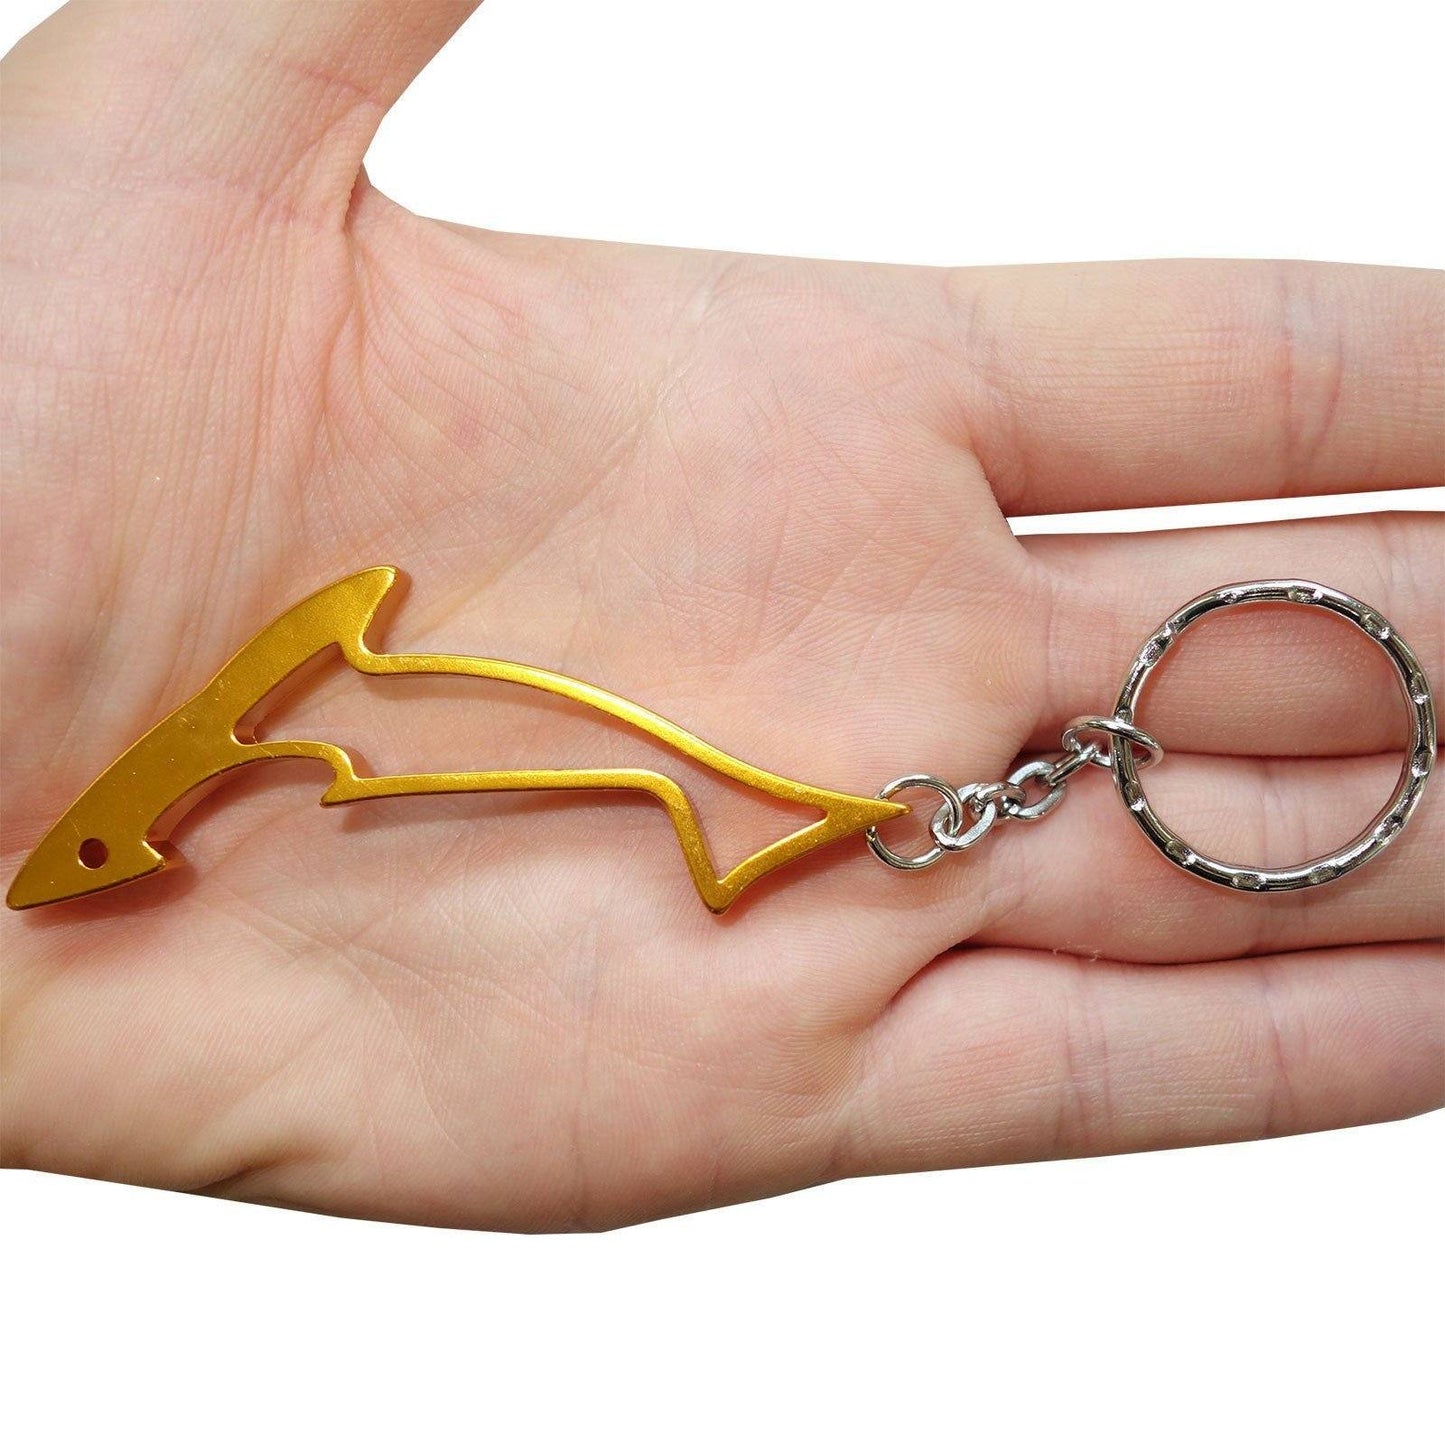 Gold Shark Key Ring Chain Fob Bottle Opener Cool Keyring Keychain Party Bag Toy